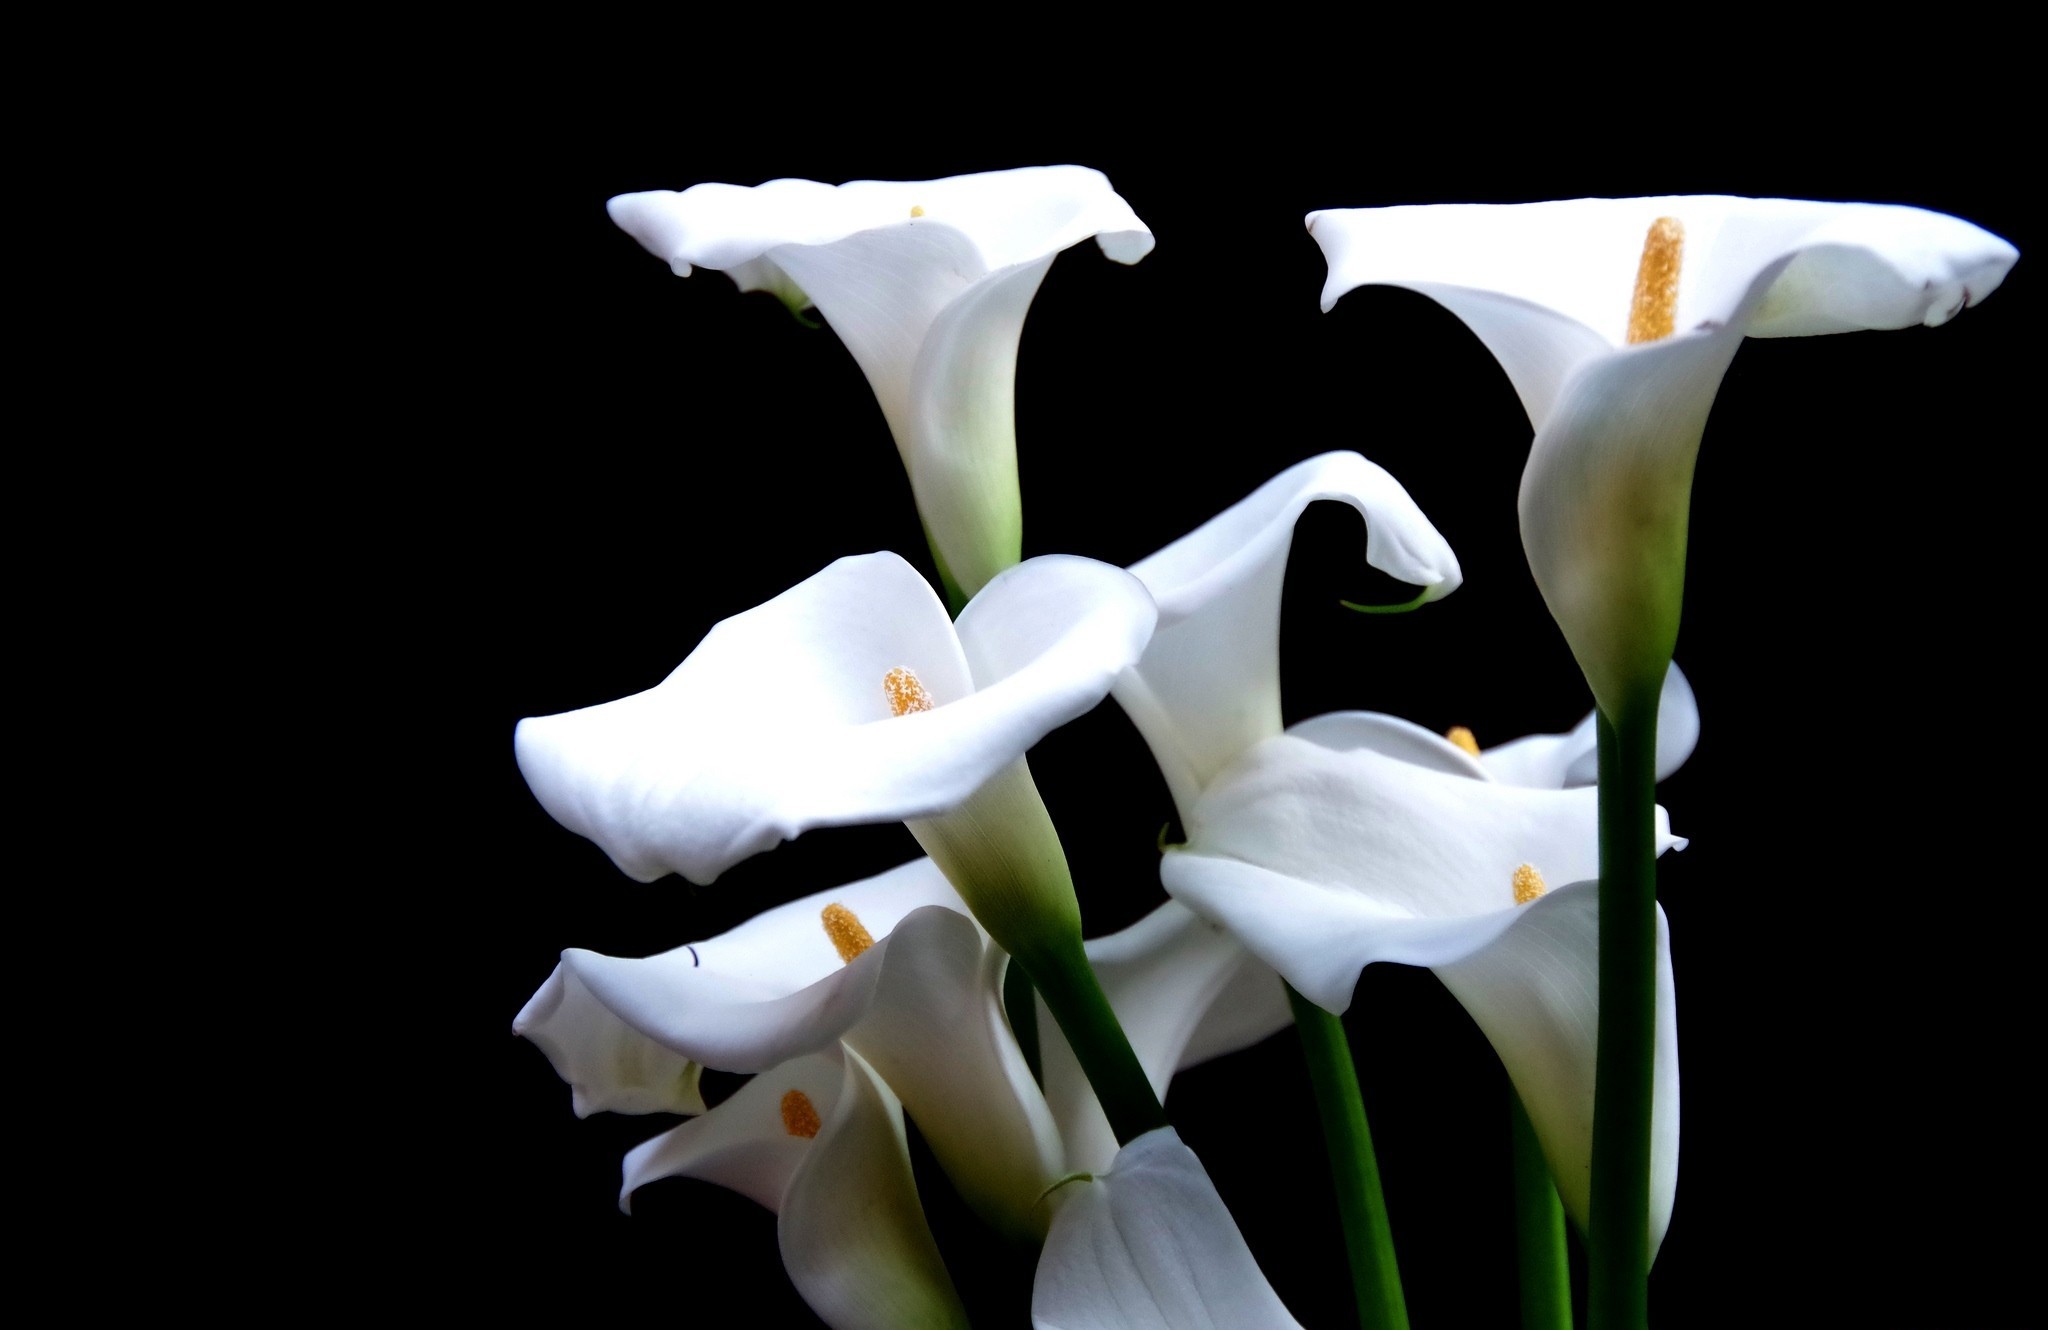 lily, earth, calla lily, calla, flower, flowers